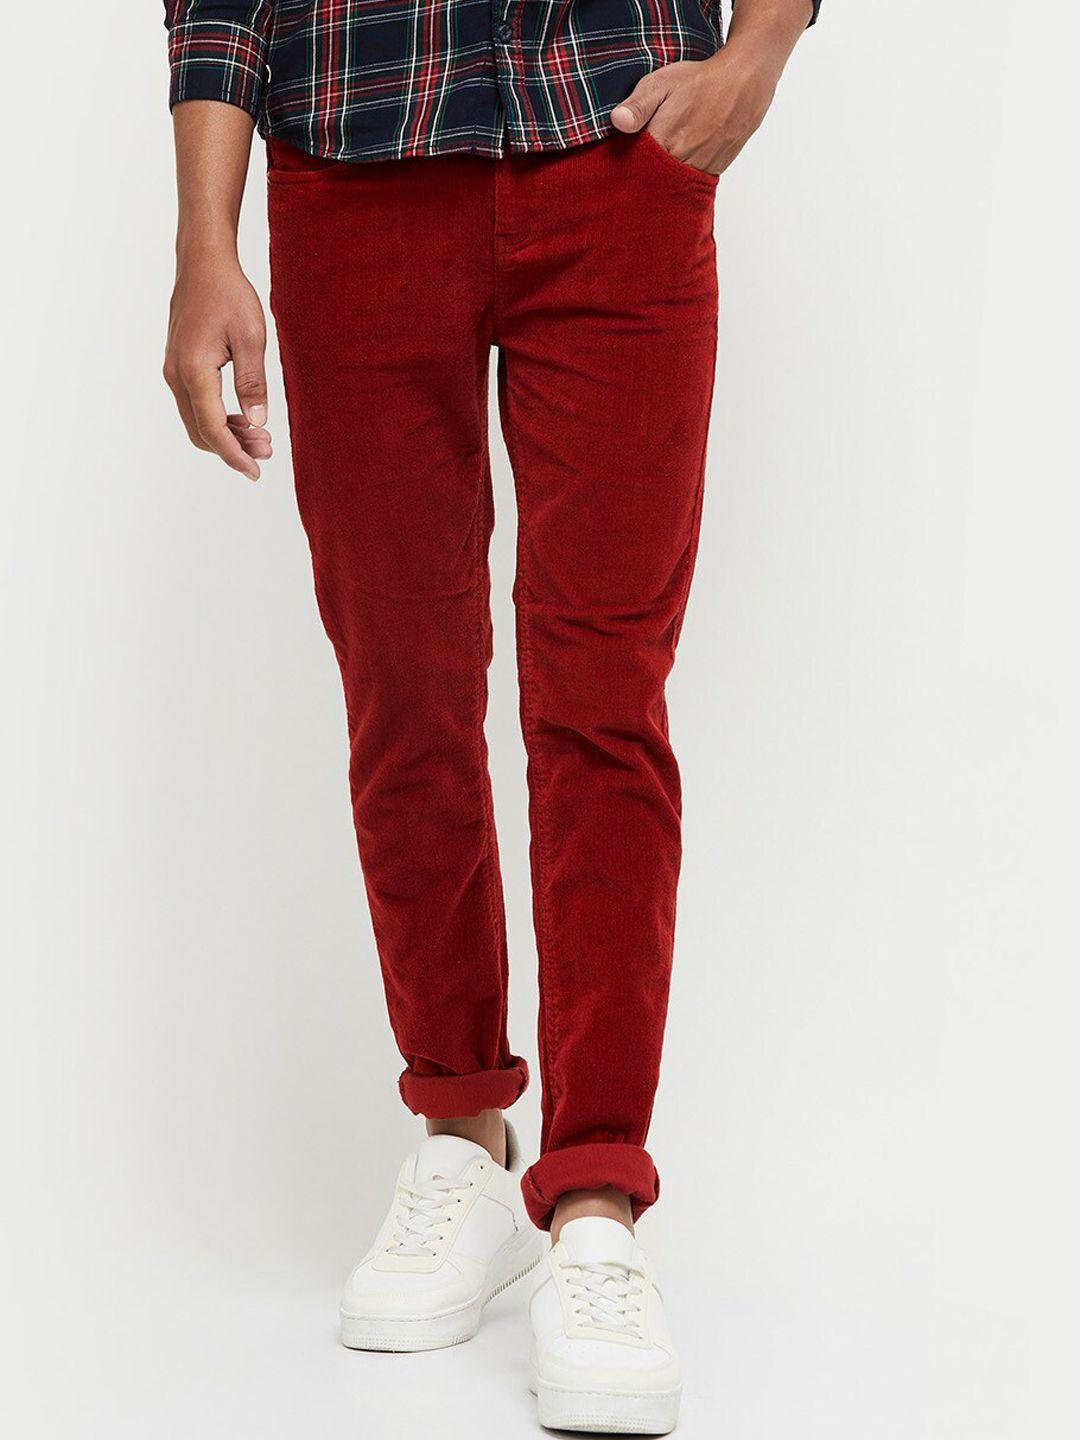 max-boys-red-cotton-chinos-trousers